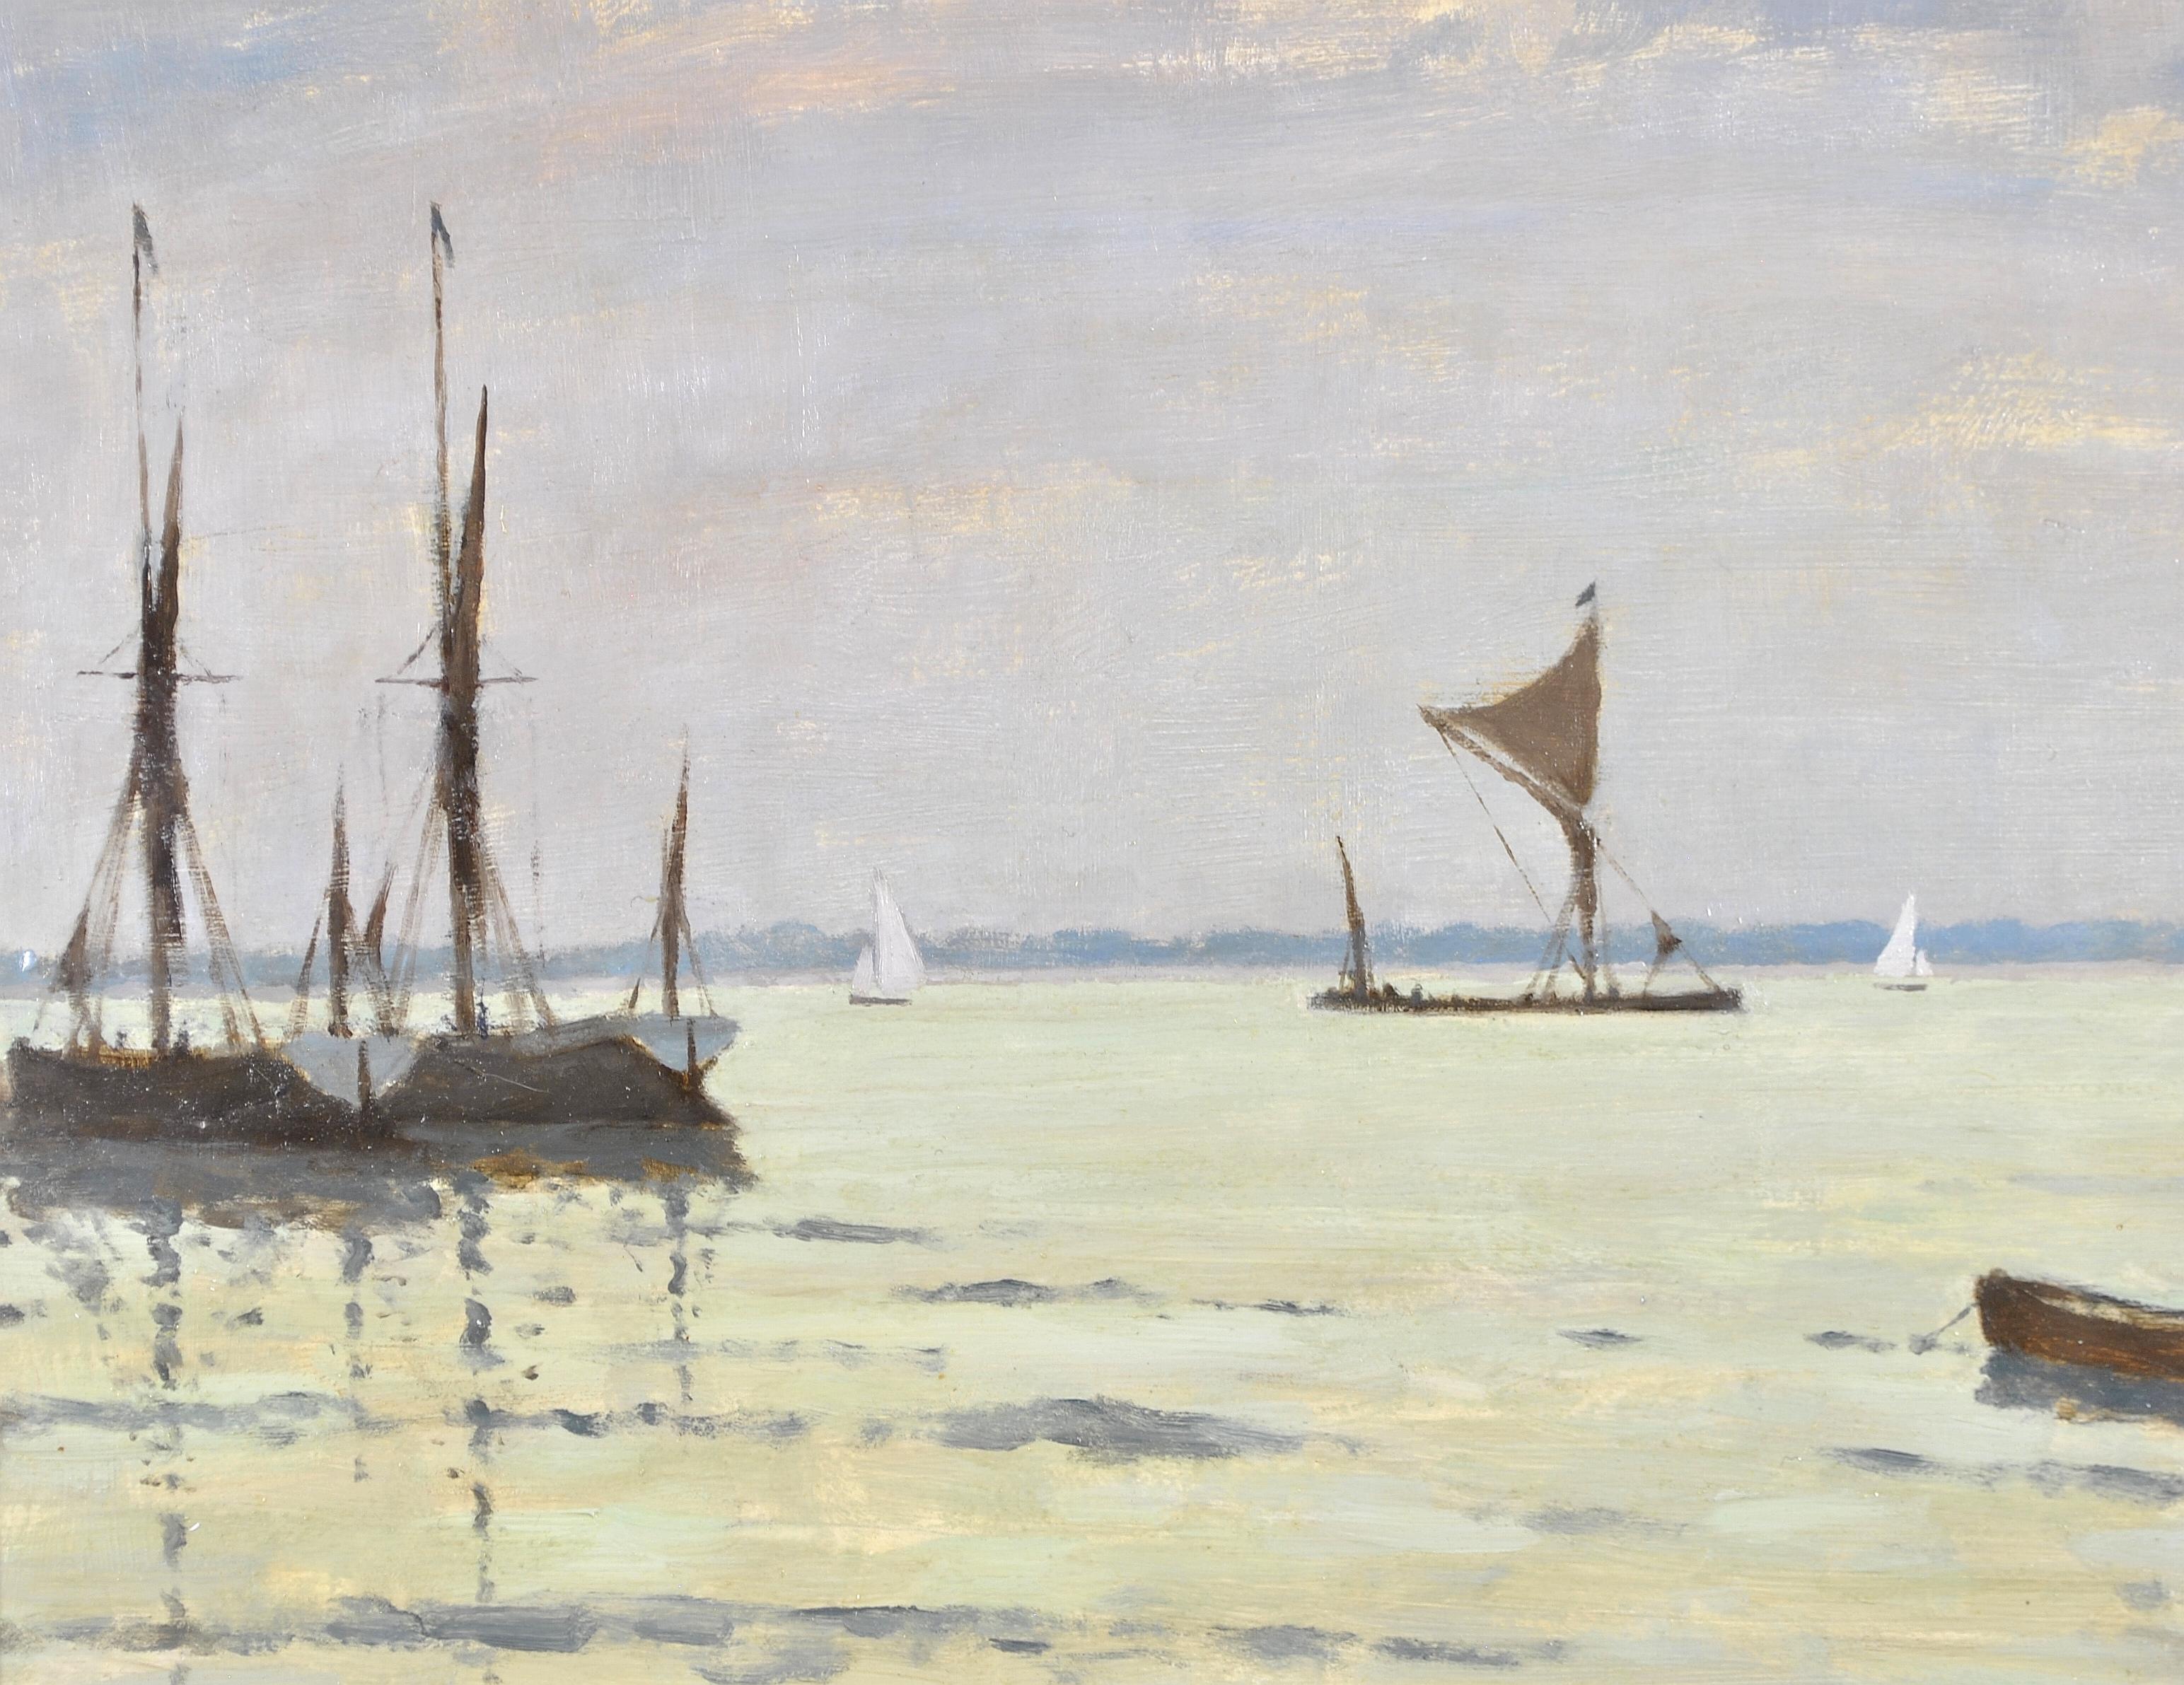 Pin Mill - Suffolk East Anglia Boats in Harbor English Impressionist Painting 3